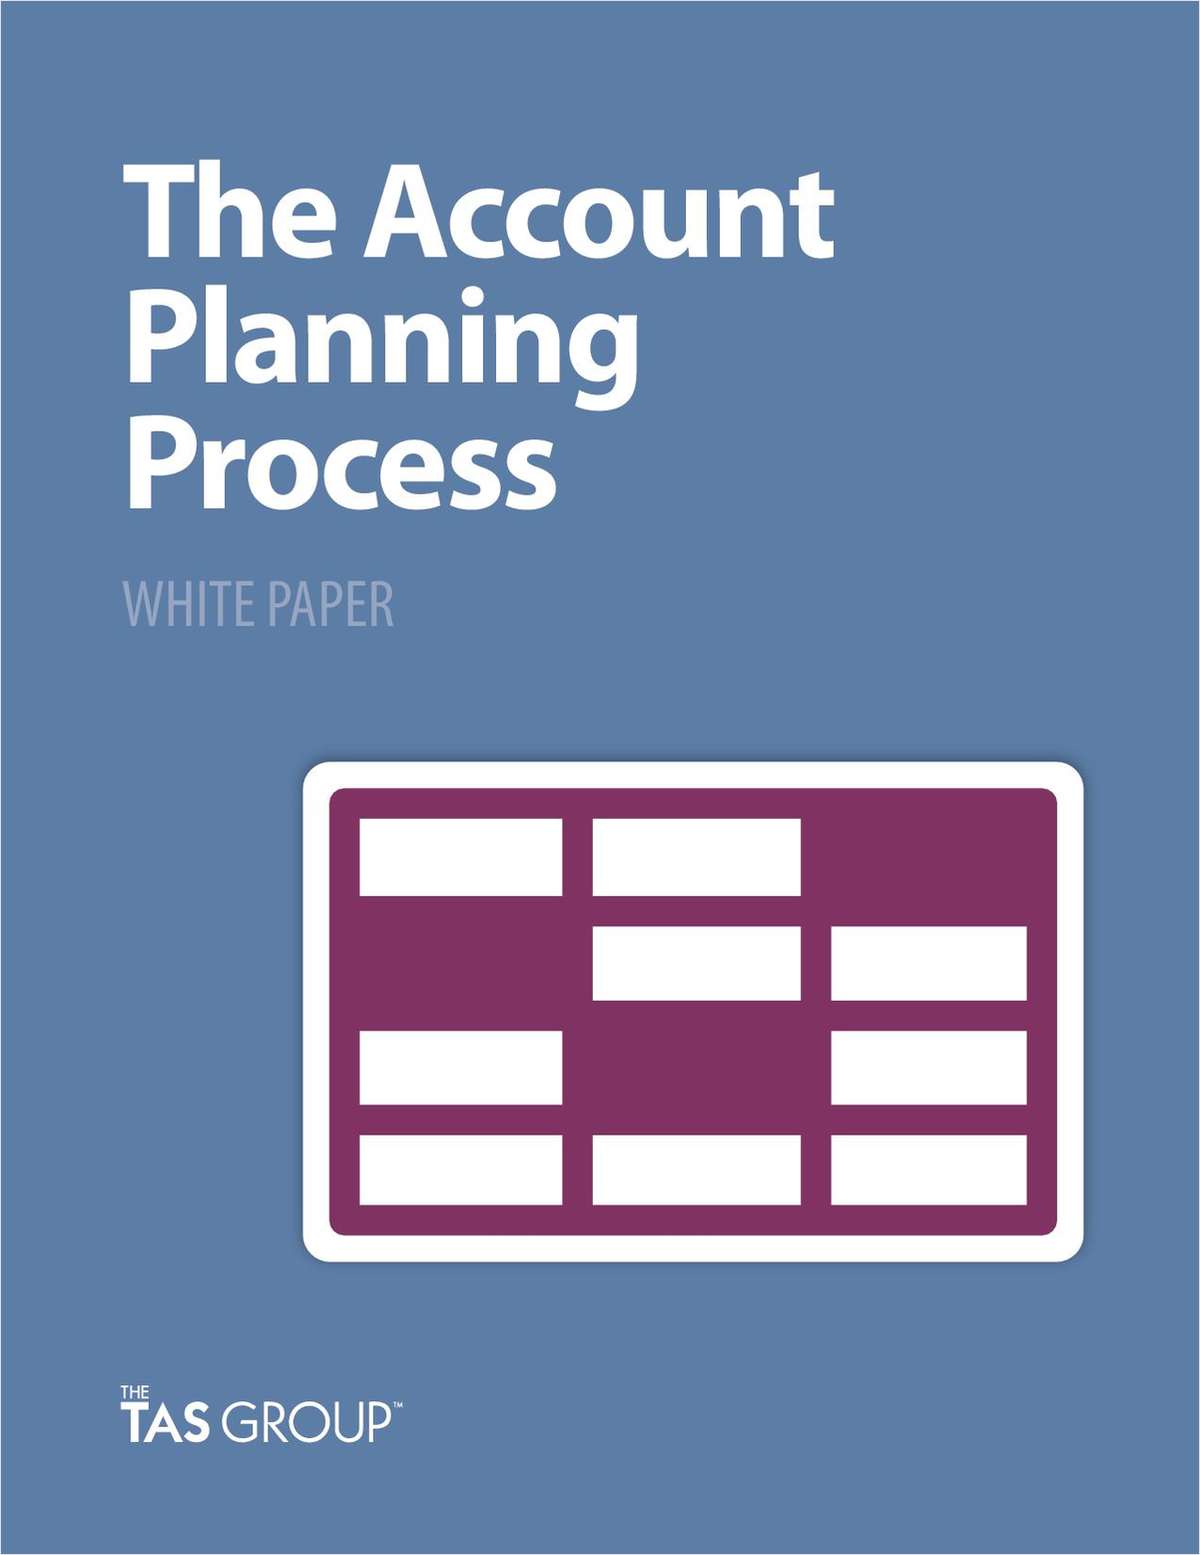 The Account Planning Process